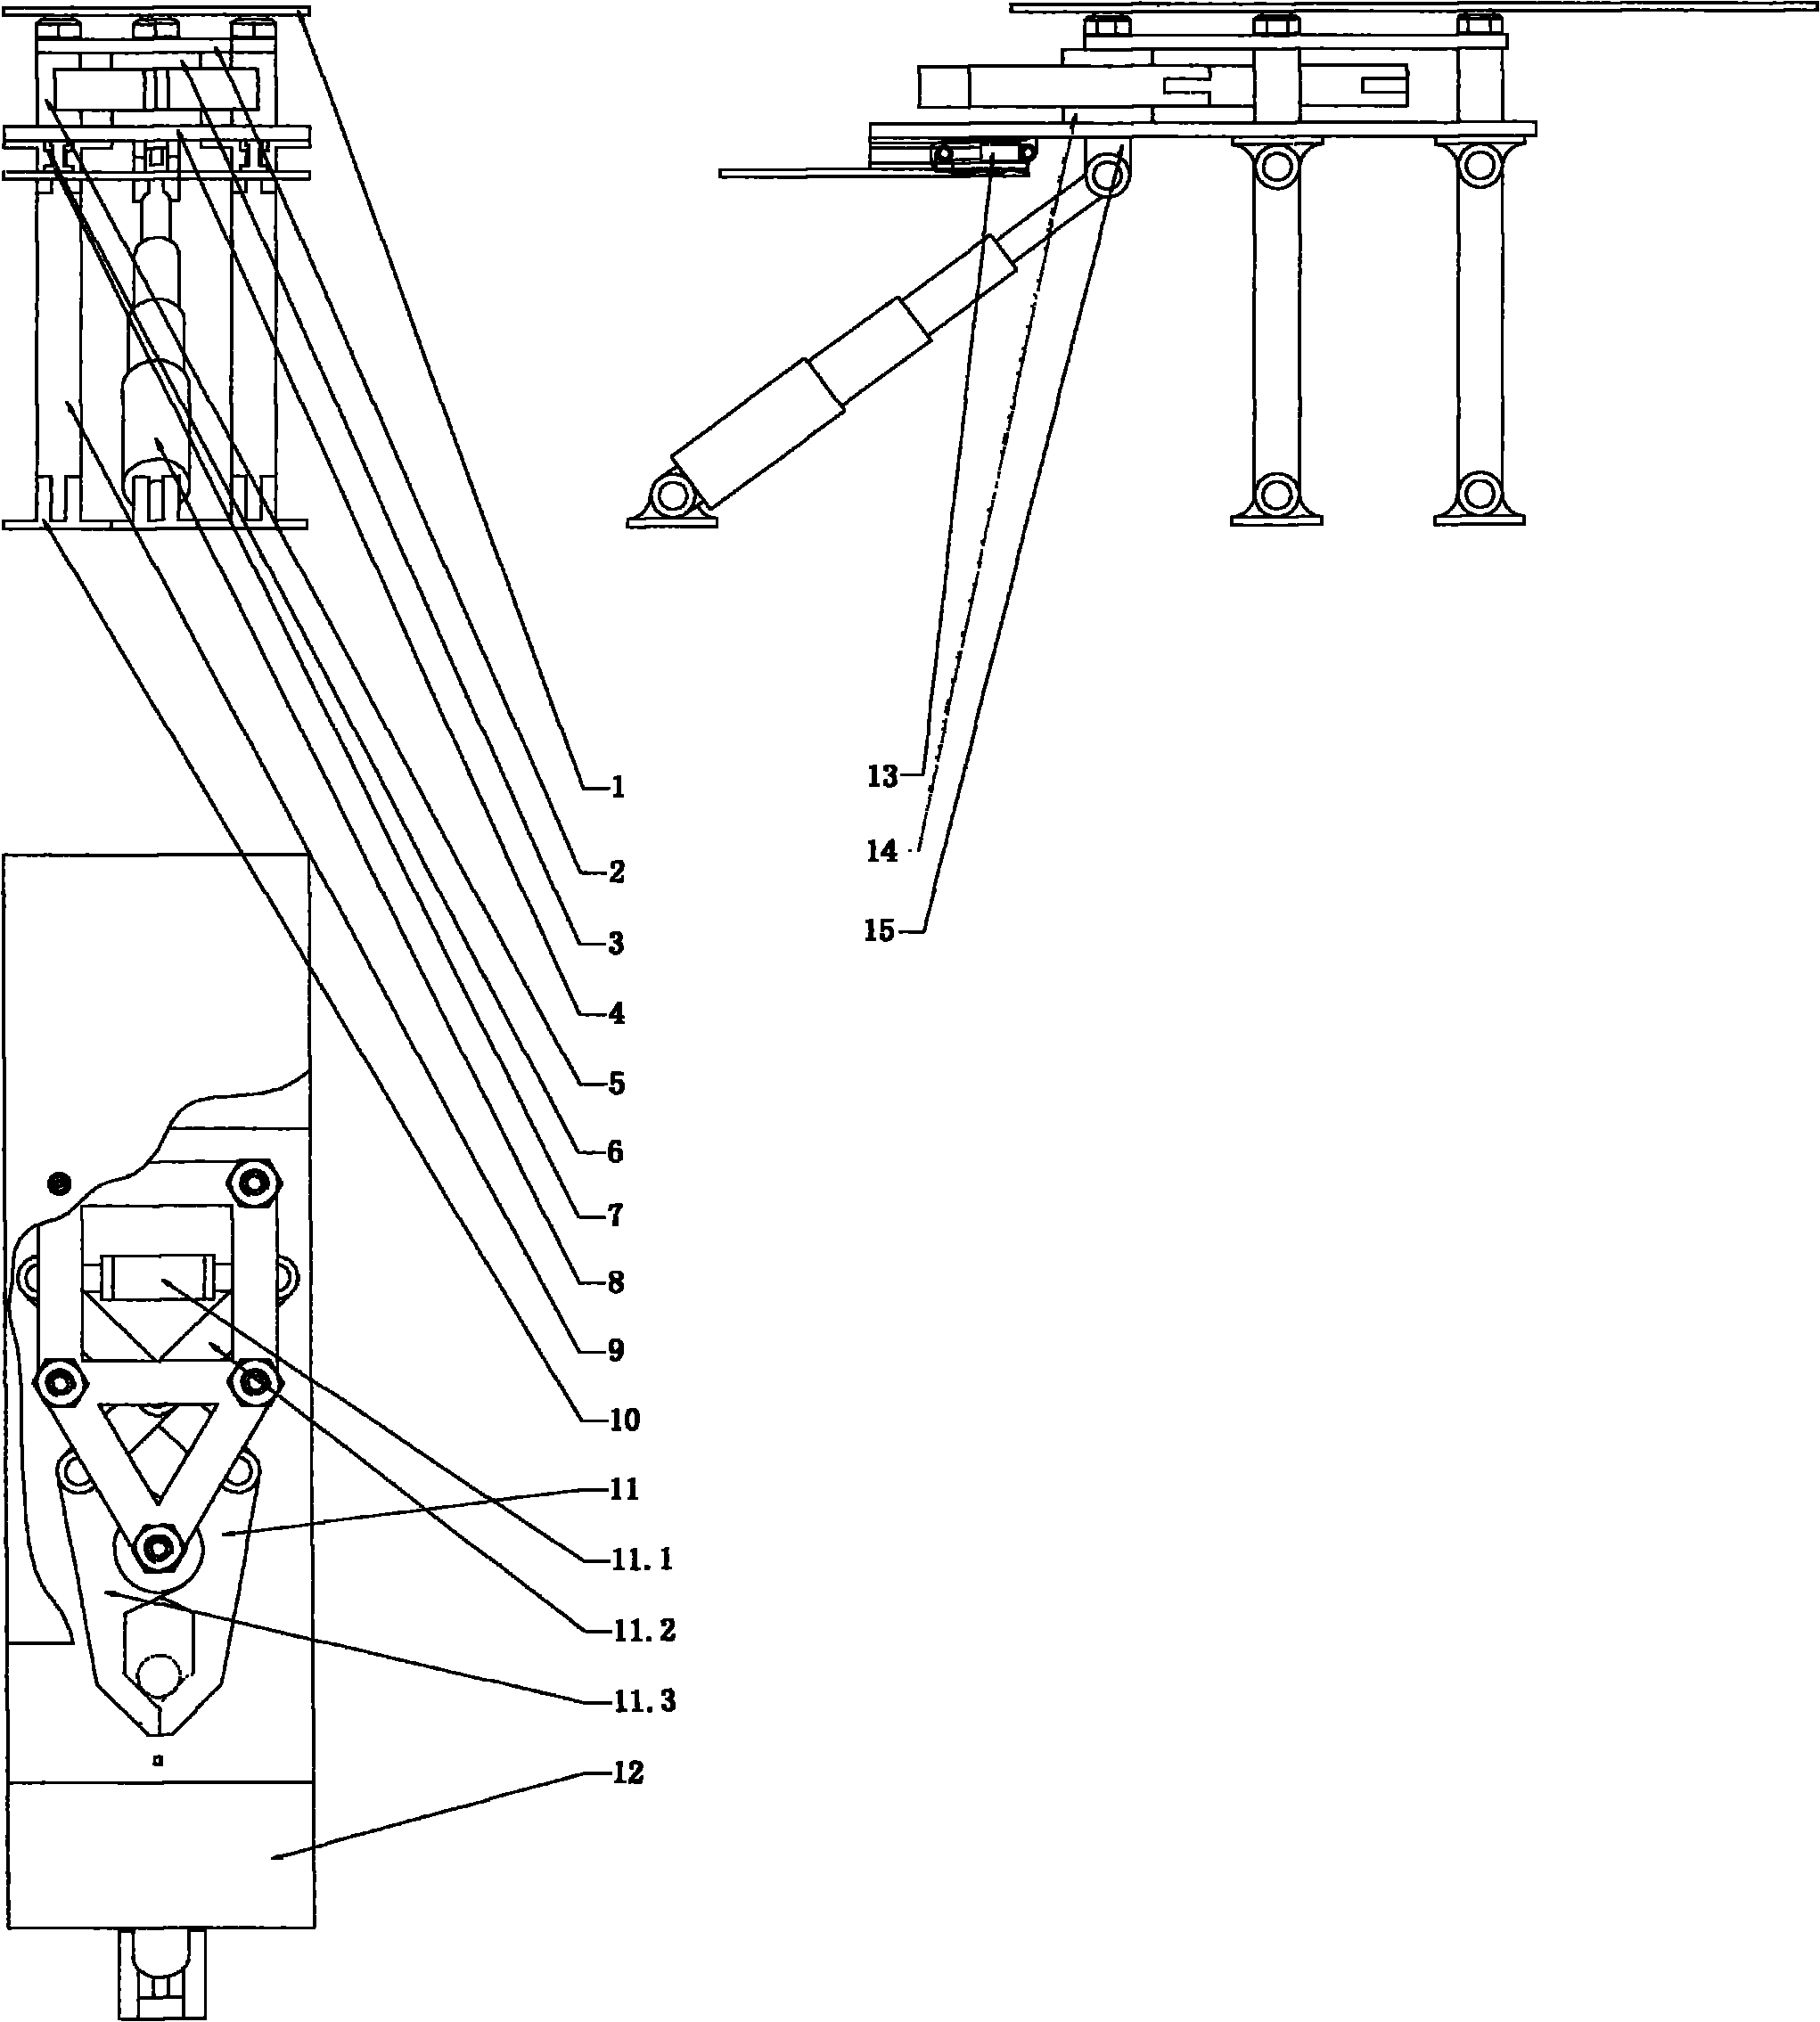 Carrier-borne aircraft takeoff assisting mechanism